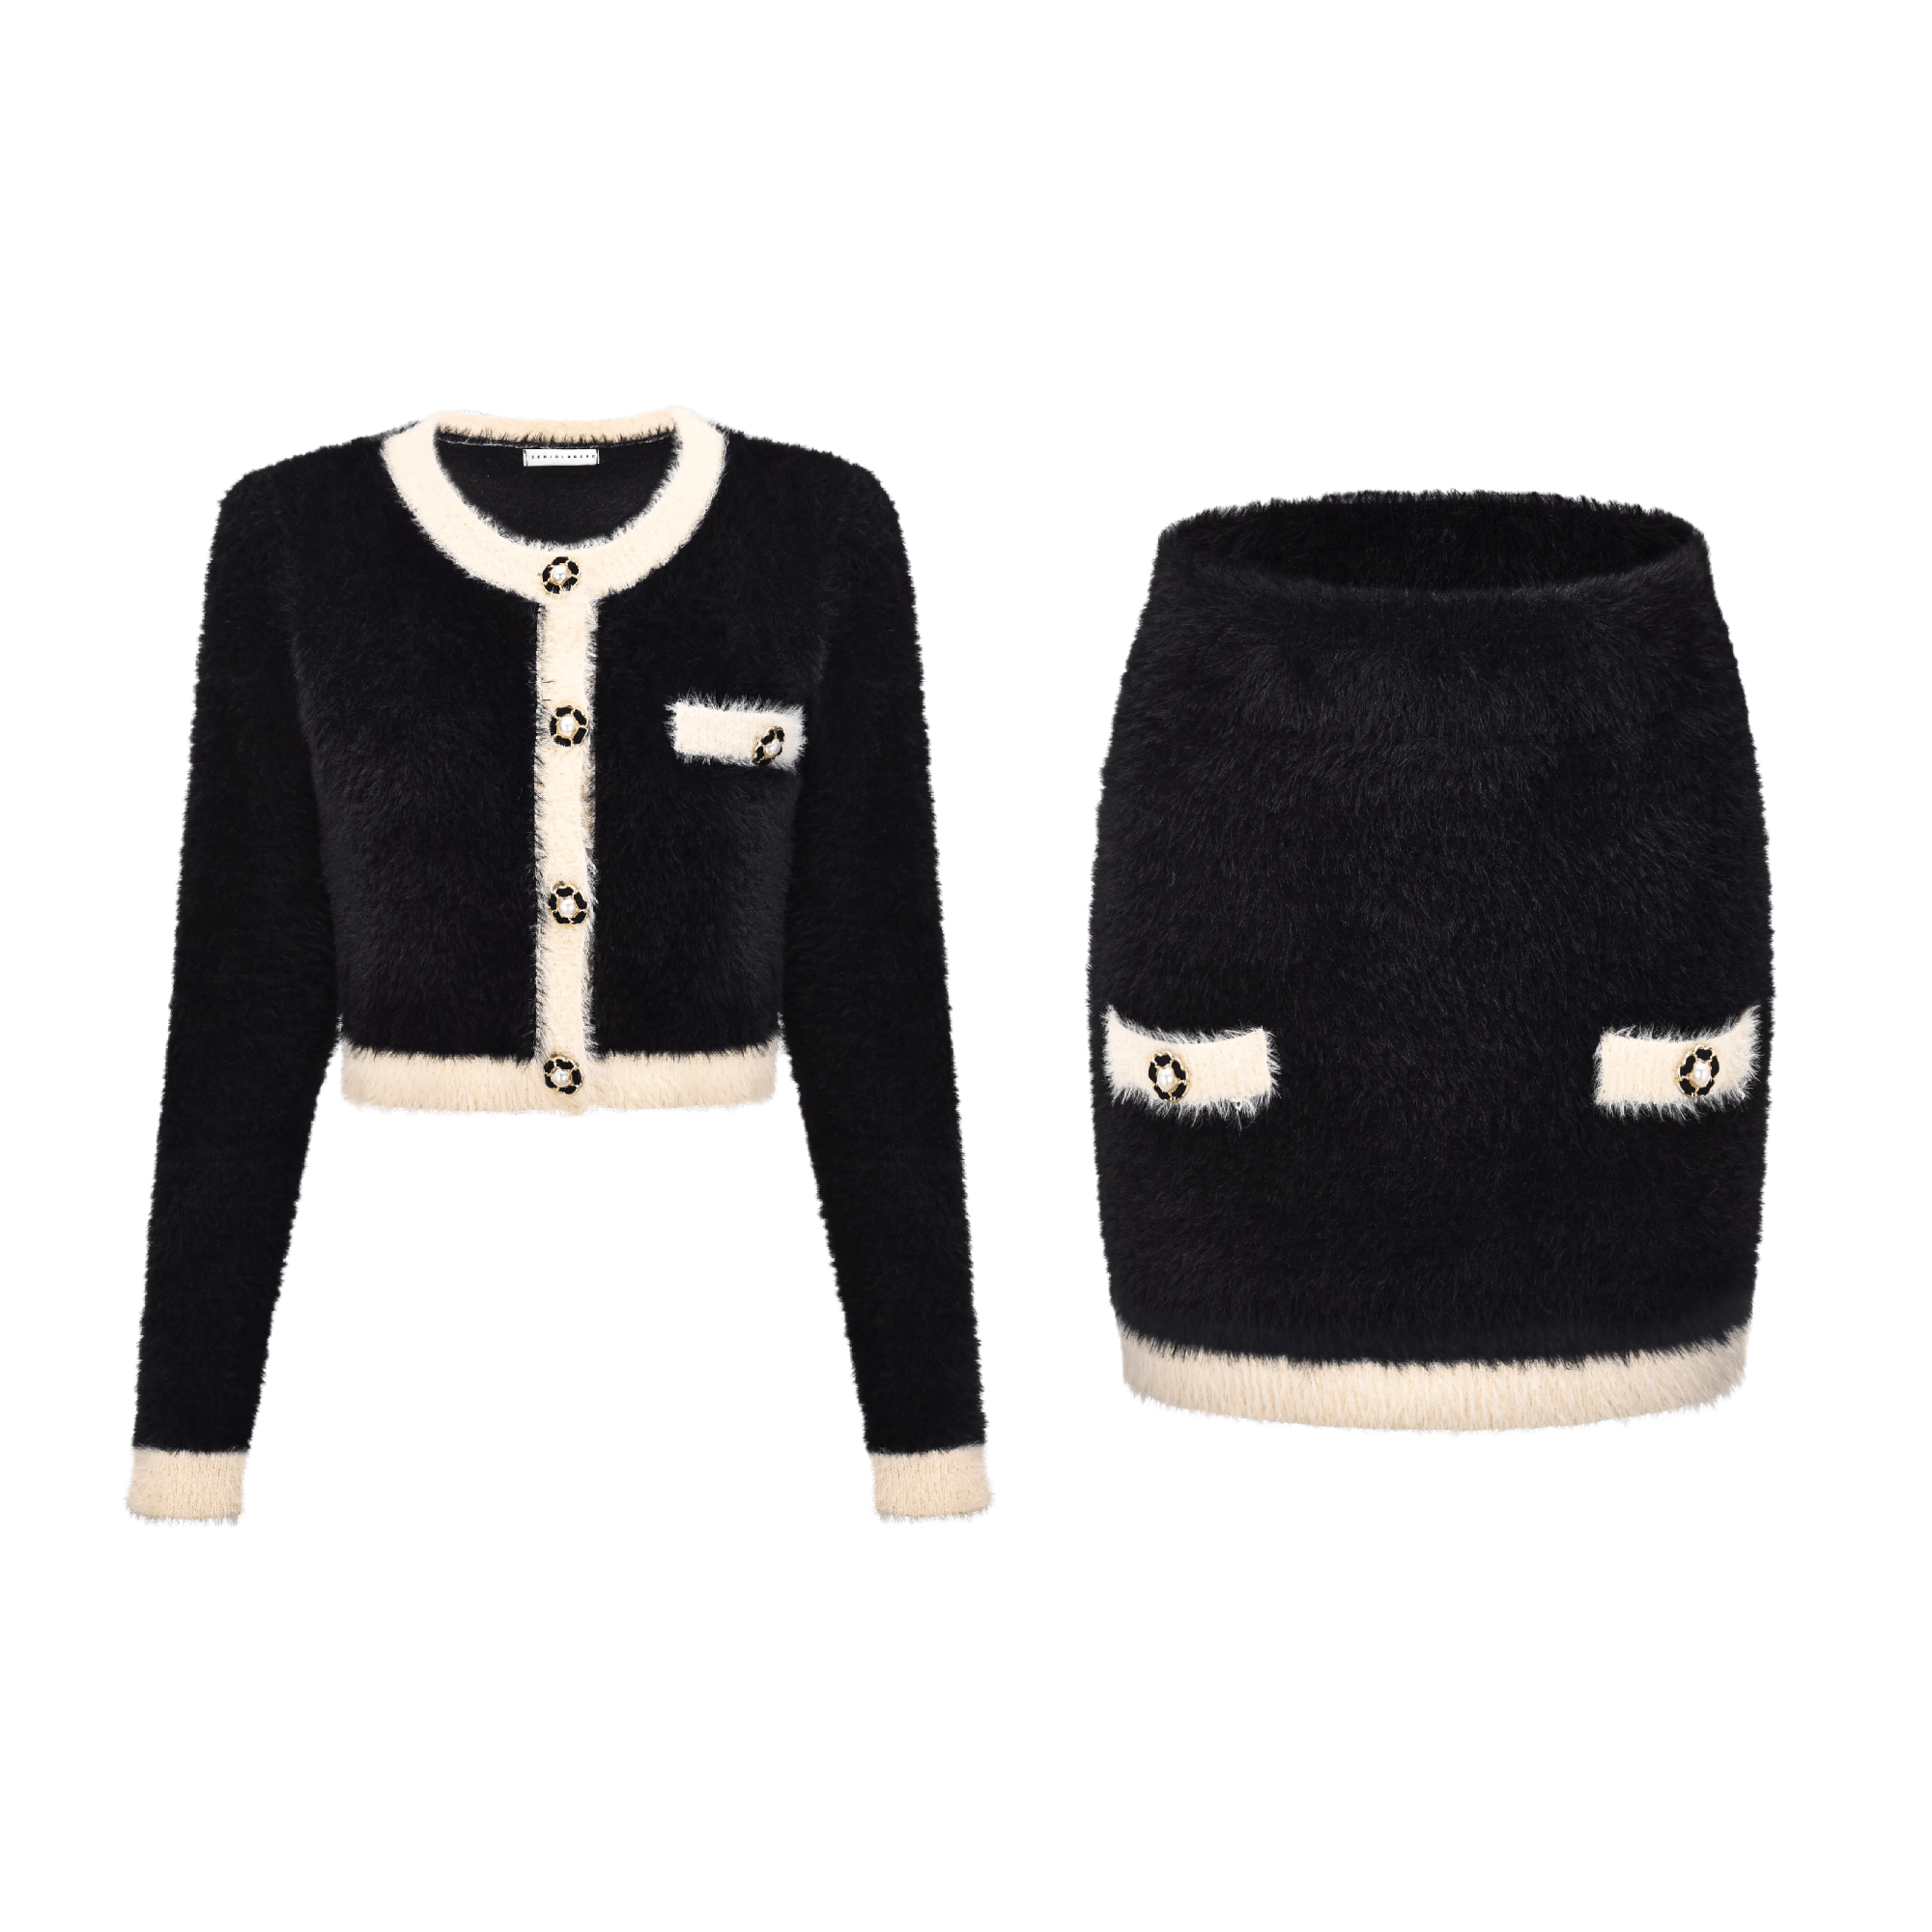 Serio Ludere-mohair panelled cropped top & skirt matching set - itsy, it‘s different